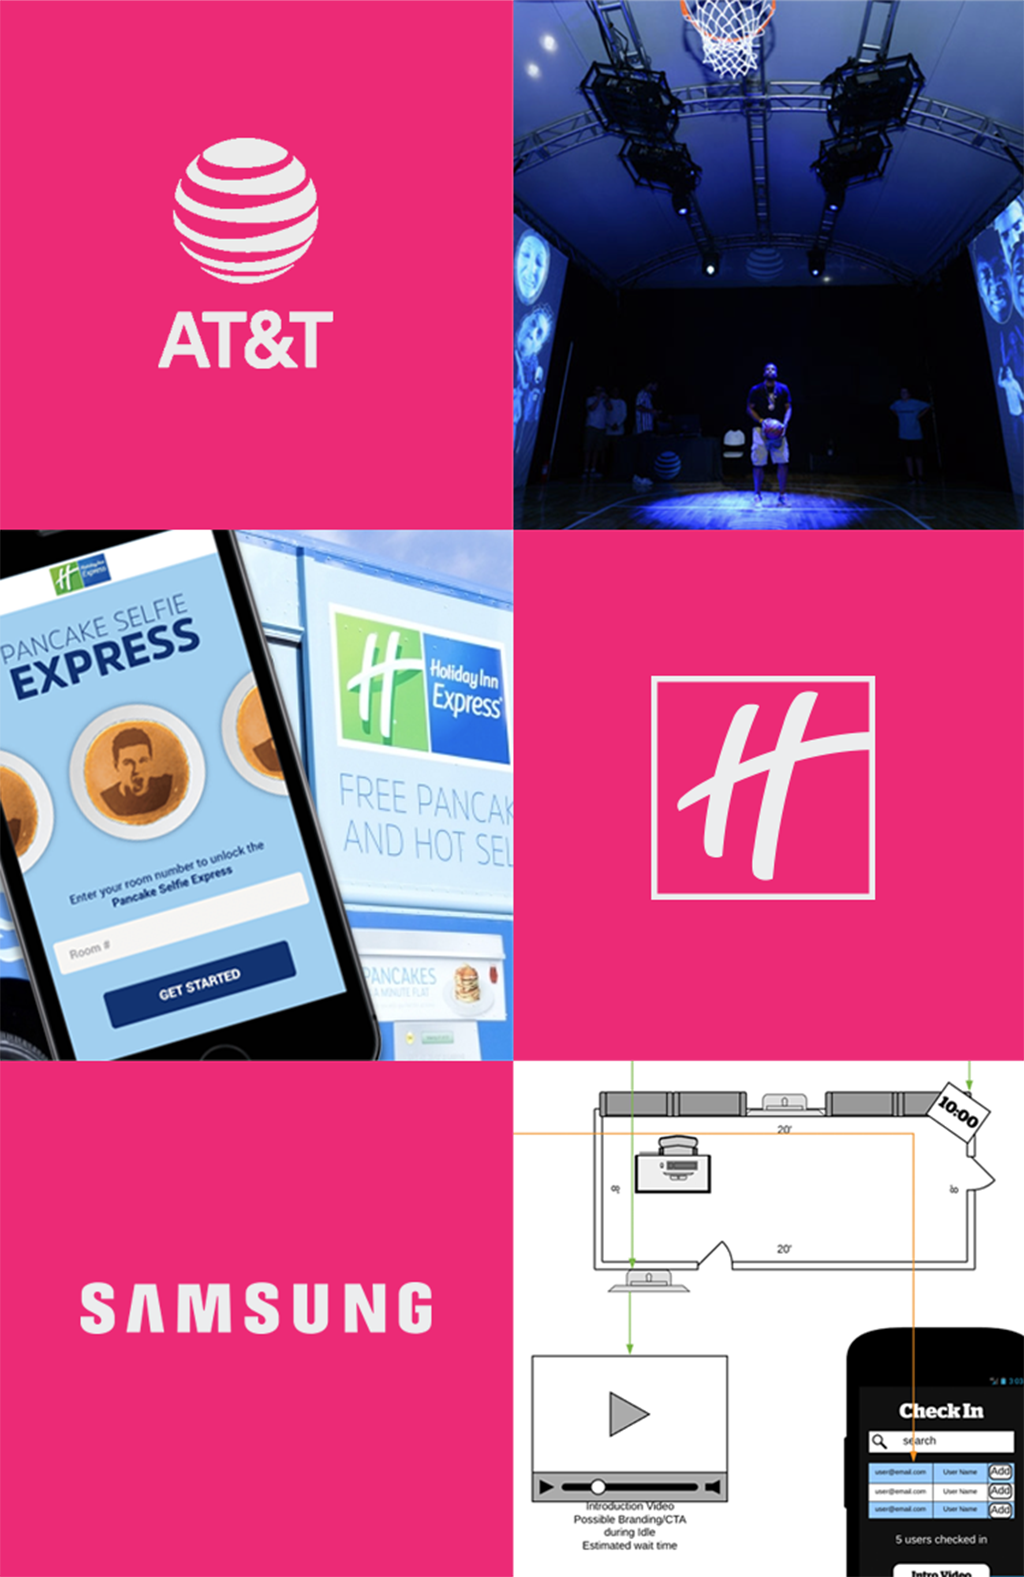 six images consisting of AT&T, Holiday Inn, and Samsung logos with an accompanying image